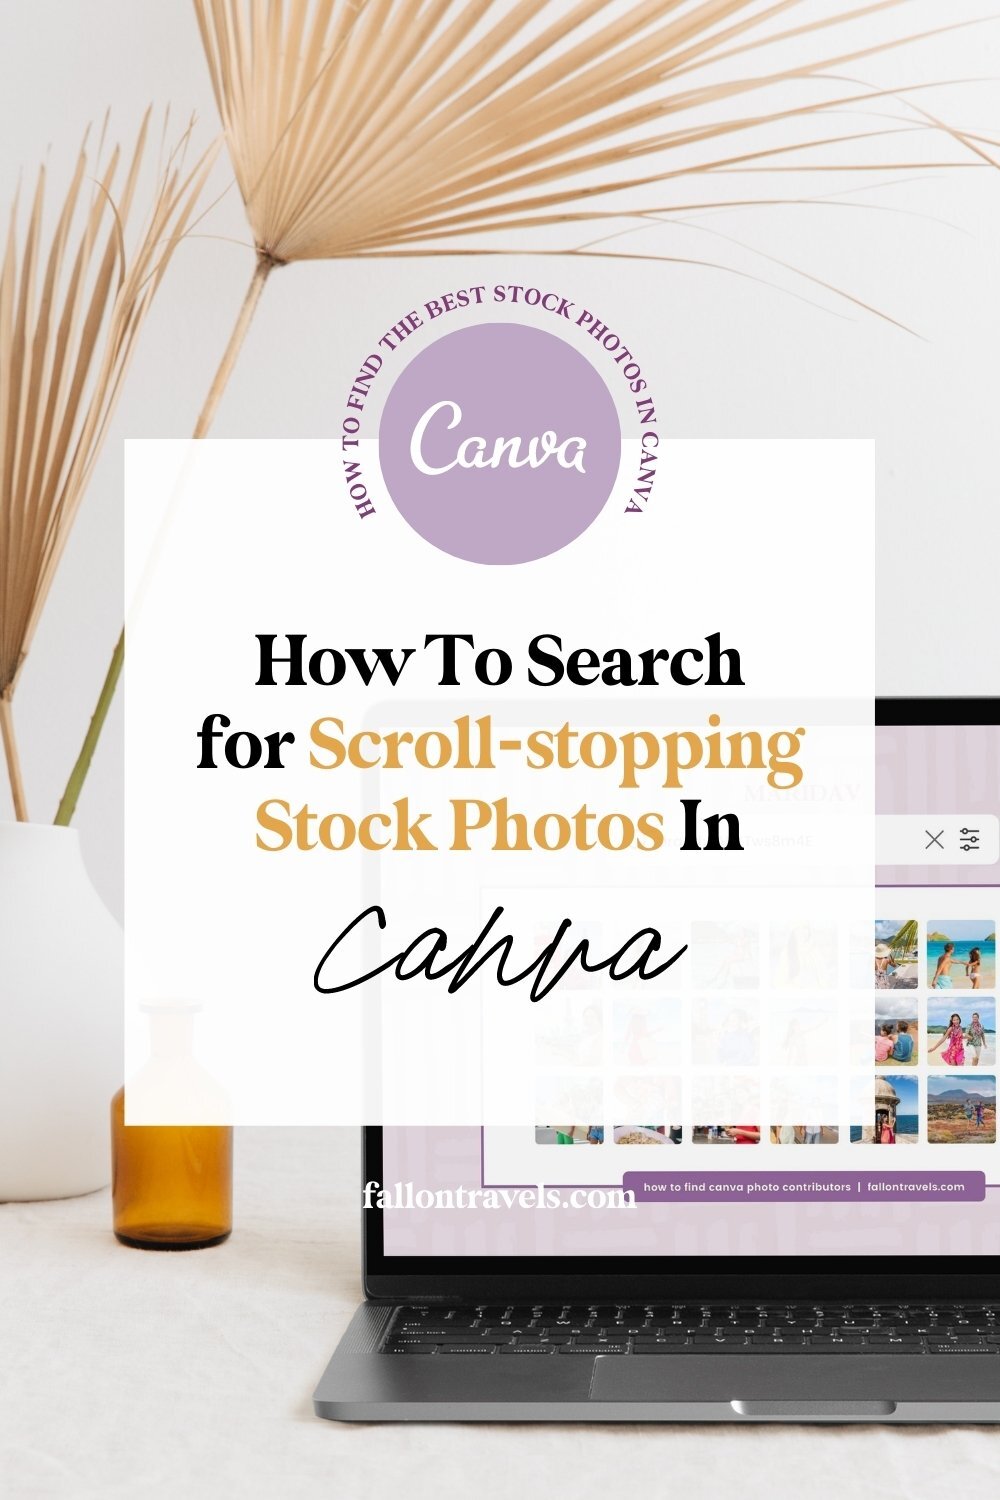 How to Search for the Best Canva Stock Photos using Brand Codes | FallonTravels.com